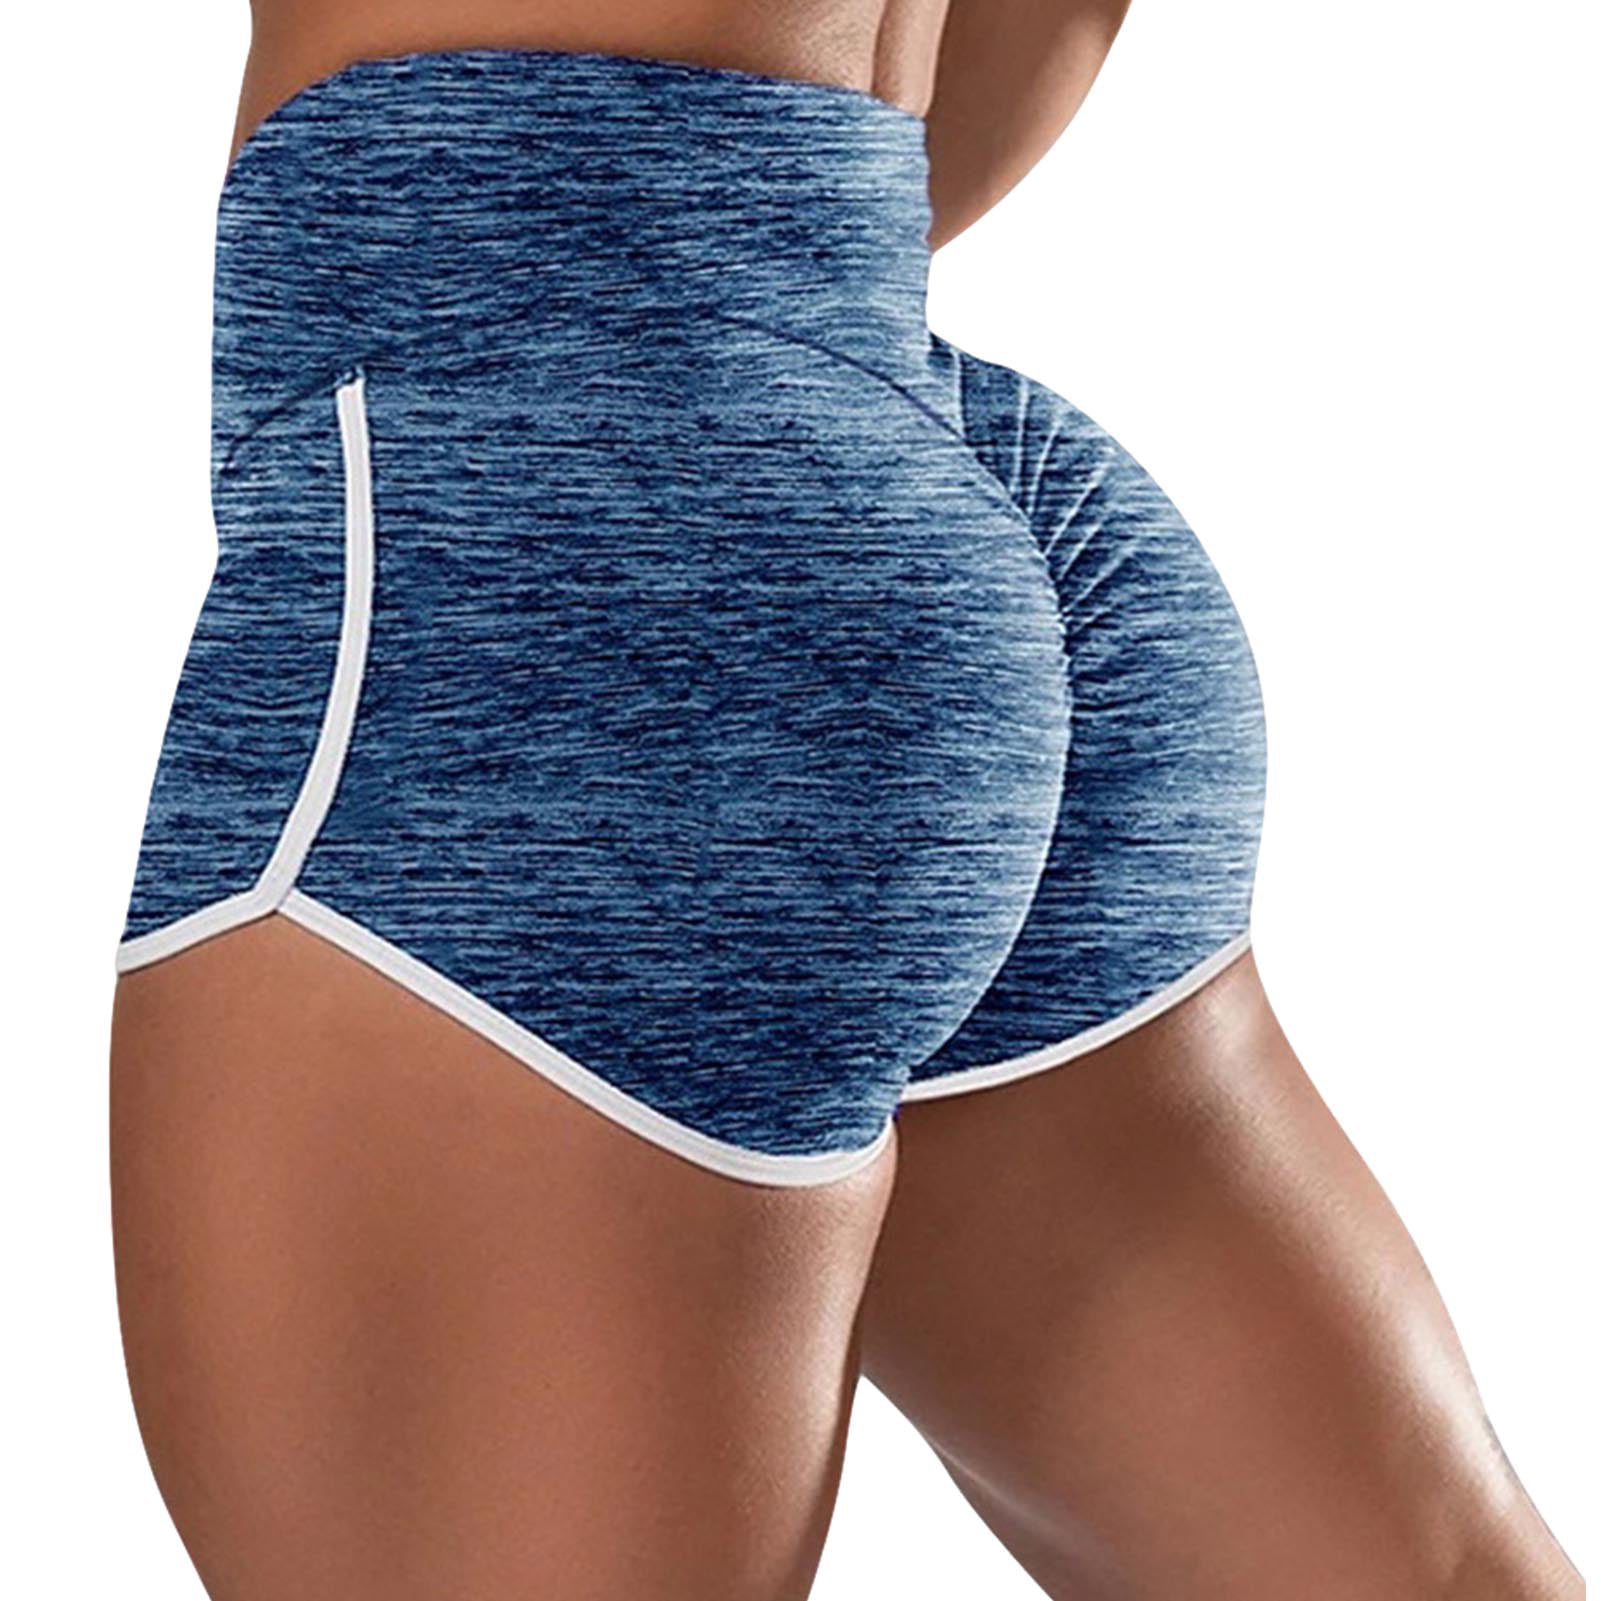 Details about   Butt Lifting Sports Shorts Women High Waist Elastic Booty Ruched Yoga Shorts 